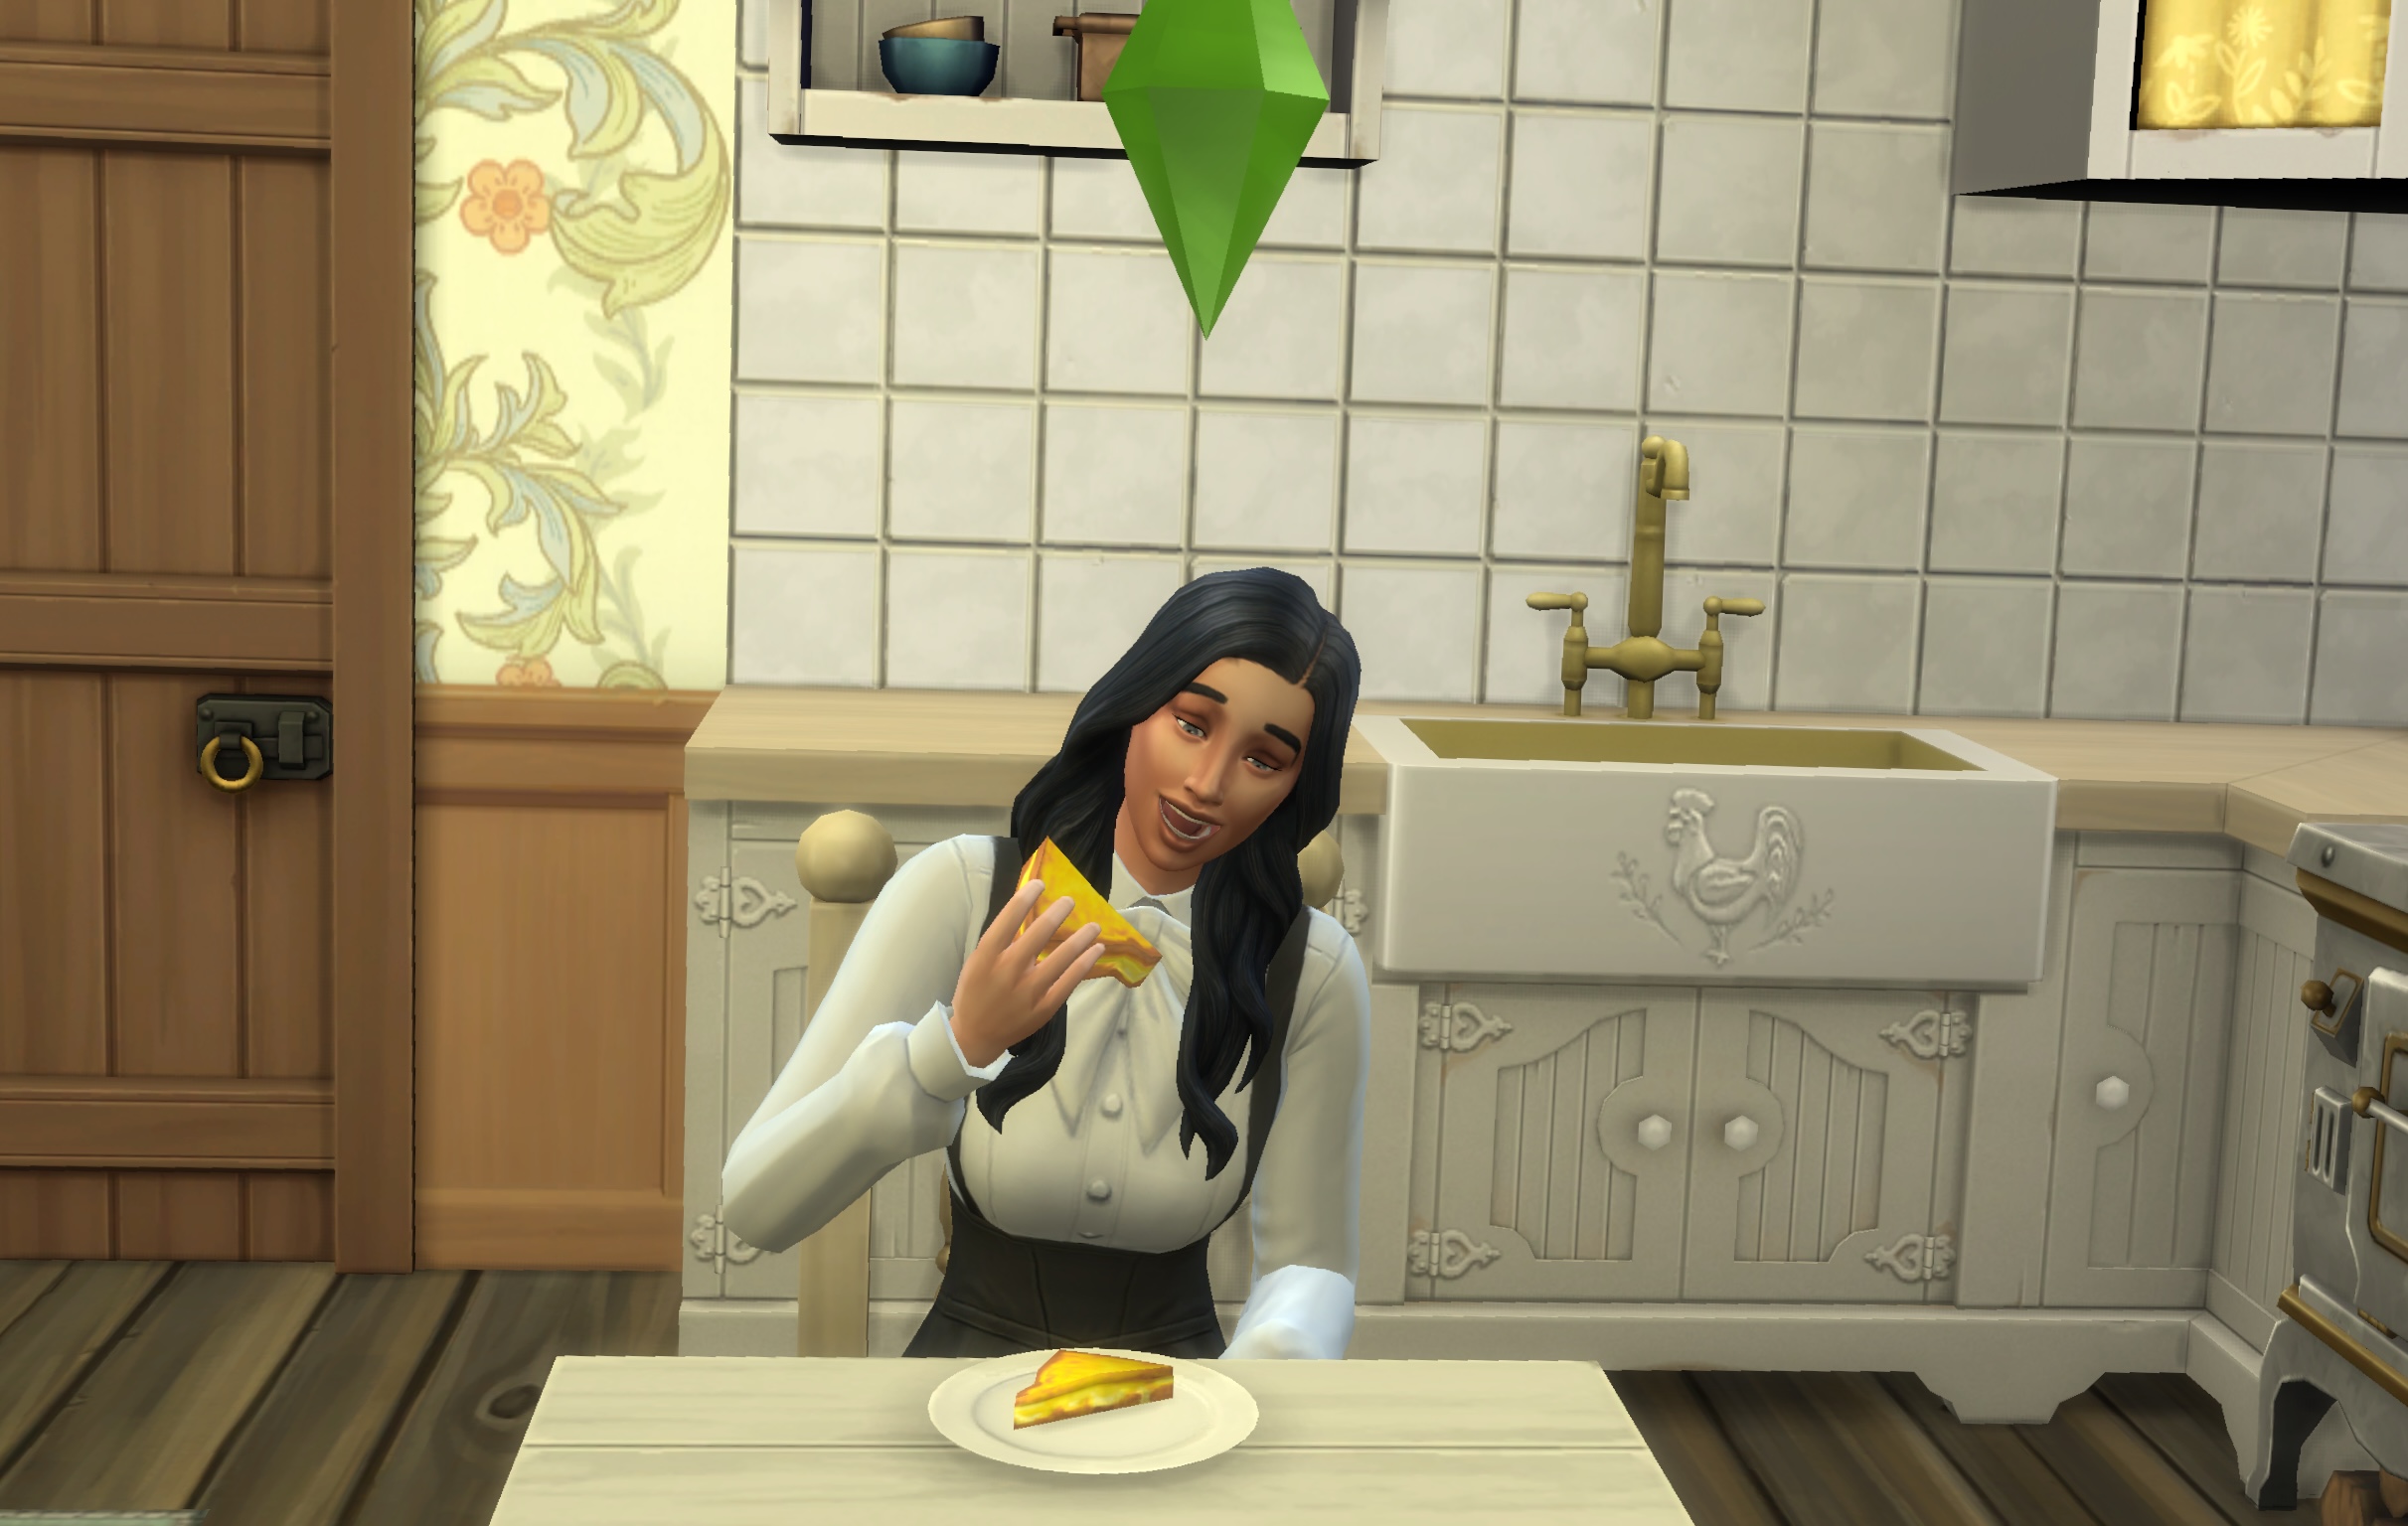 The Sim, Gabriella Duke, sitting at a table in her kitchen eating a grilled cheese sandwich.